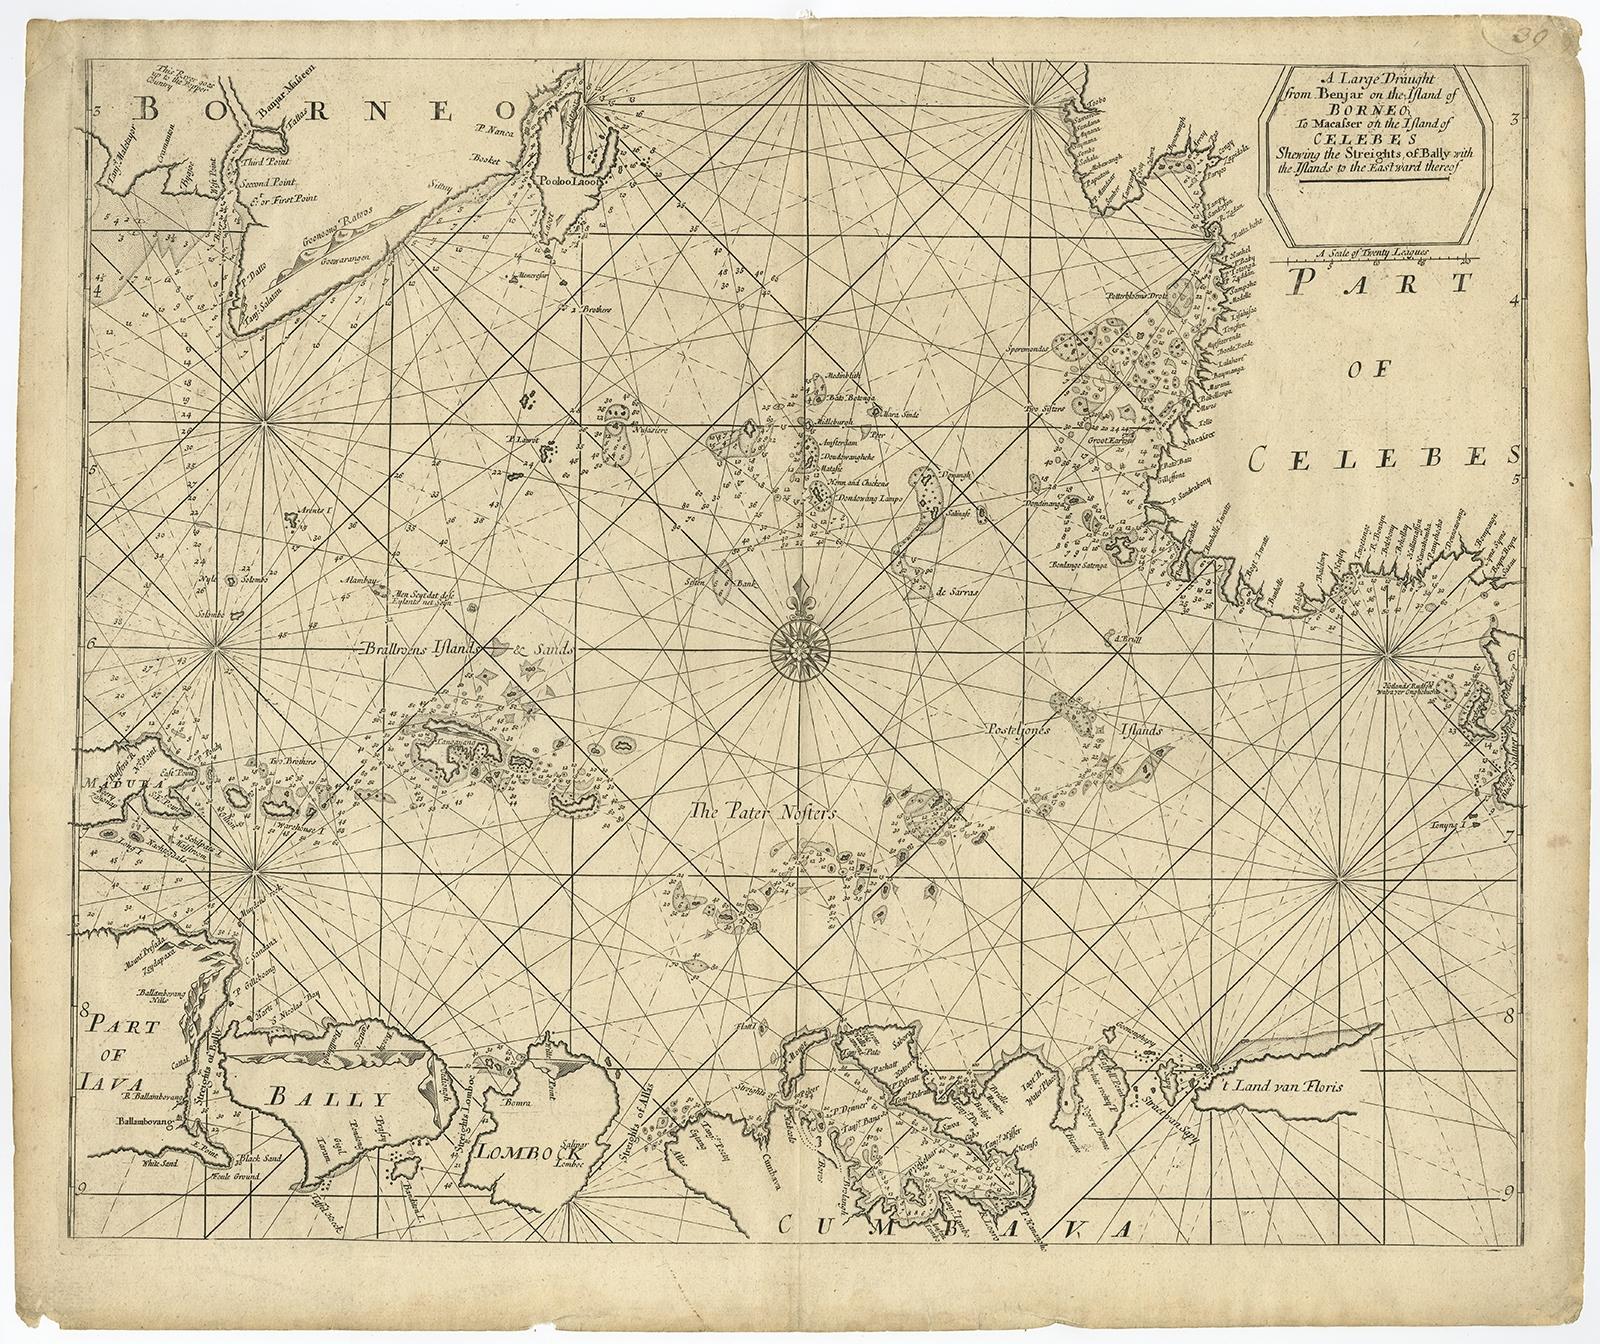 Antique map titled 'A Large Draught from Benjar on the Island of Borneo To Macasser on the Island of Celebes Shewing the Streight of Bally with the Islands to the Eastward thereof.' 

Rare early example of this working English Sea Chart of part of